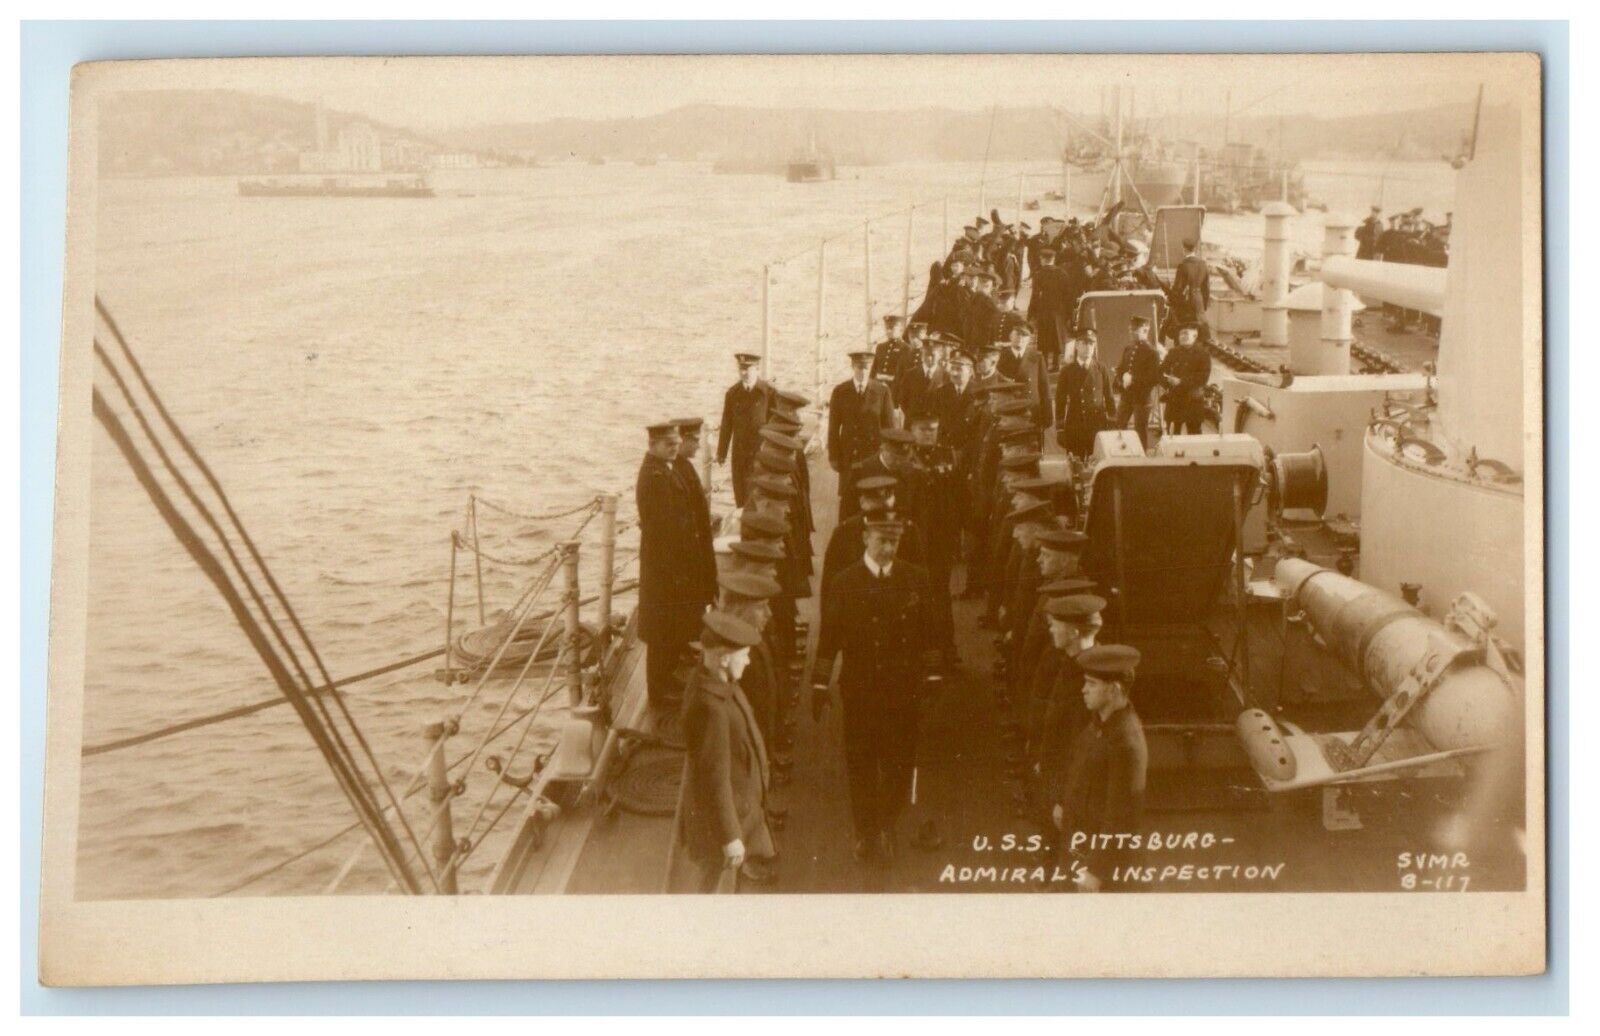 c1920's USS Pittsburgh Admiral Inspection RPPC Photo Unposted Vintage Postcard